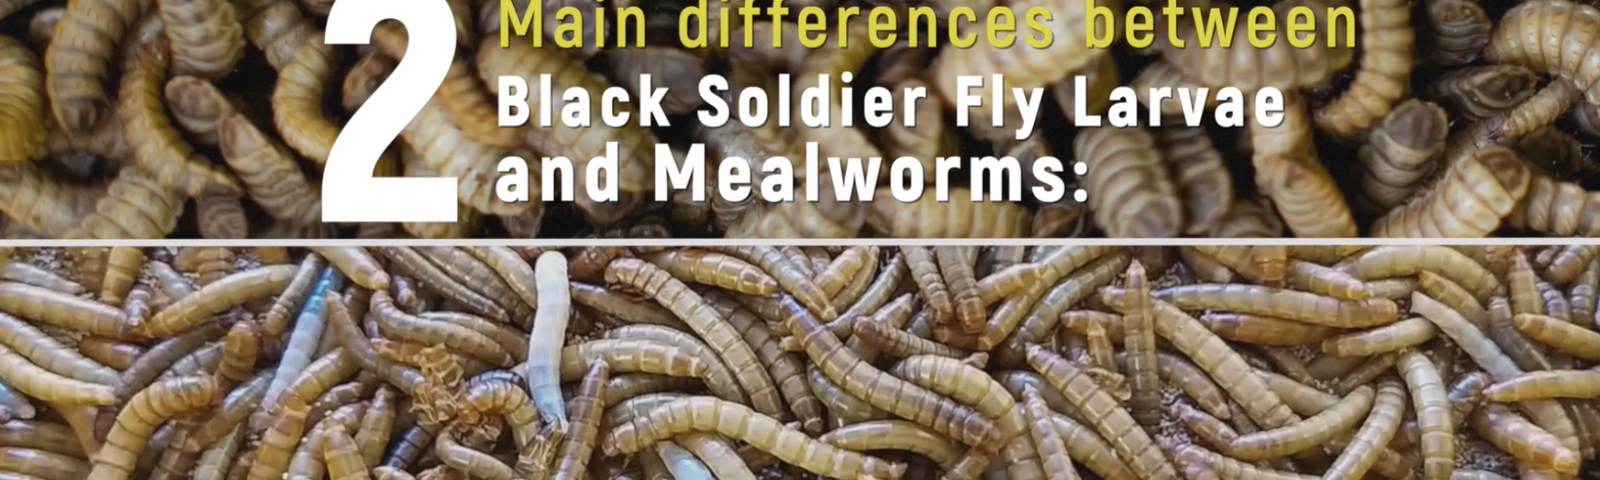 Only the Best for Your Birds: The Benefits of Black Soldier Fly Larvae vs. Mealworms